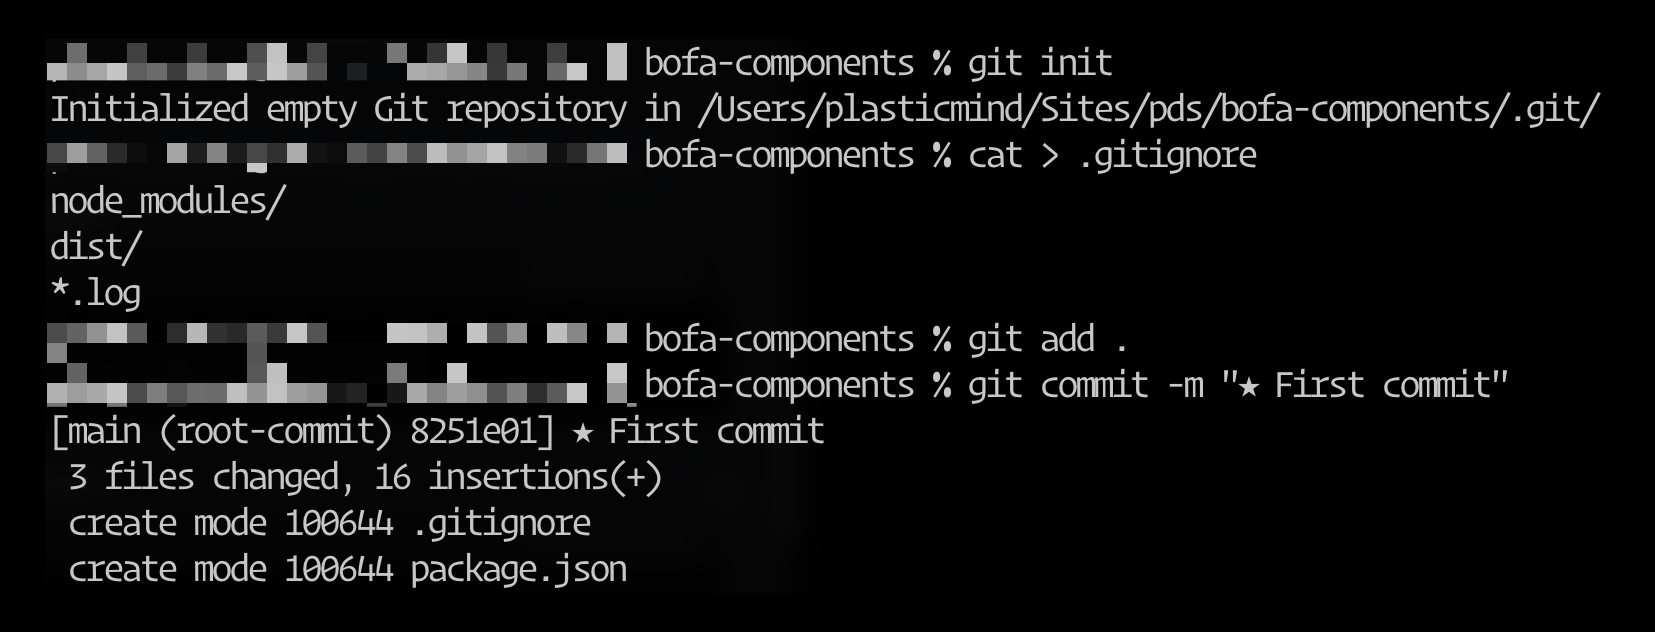 Initializing the Git repository